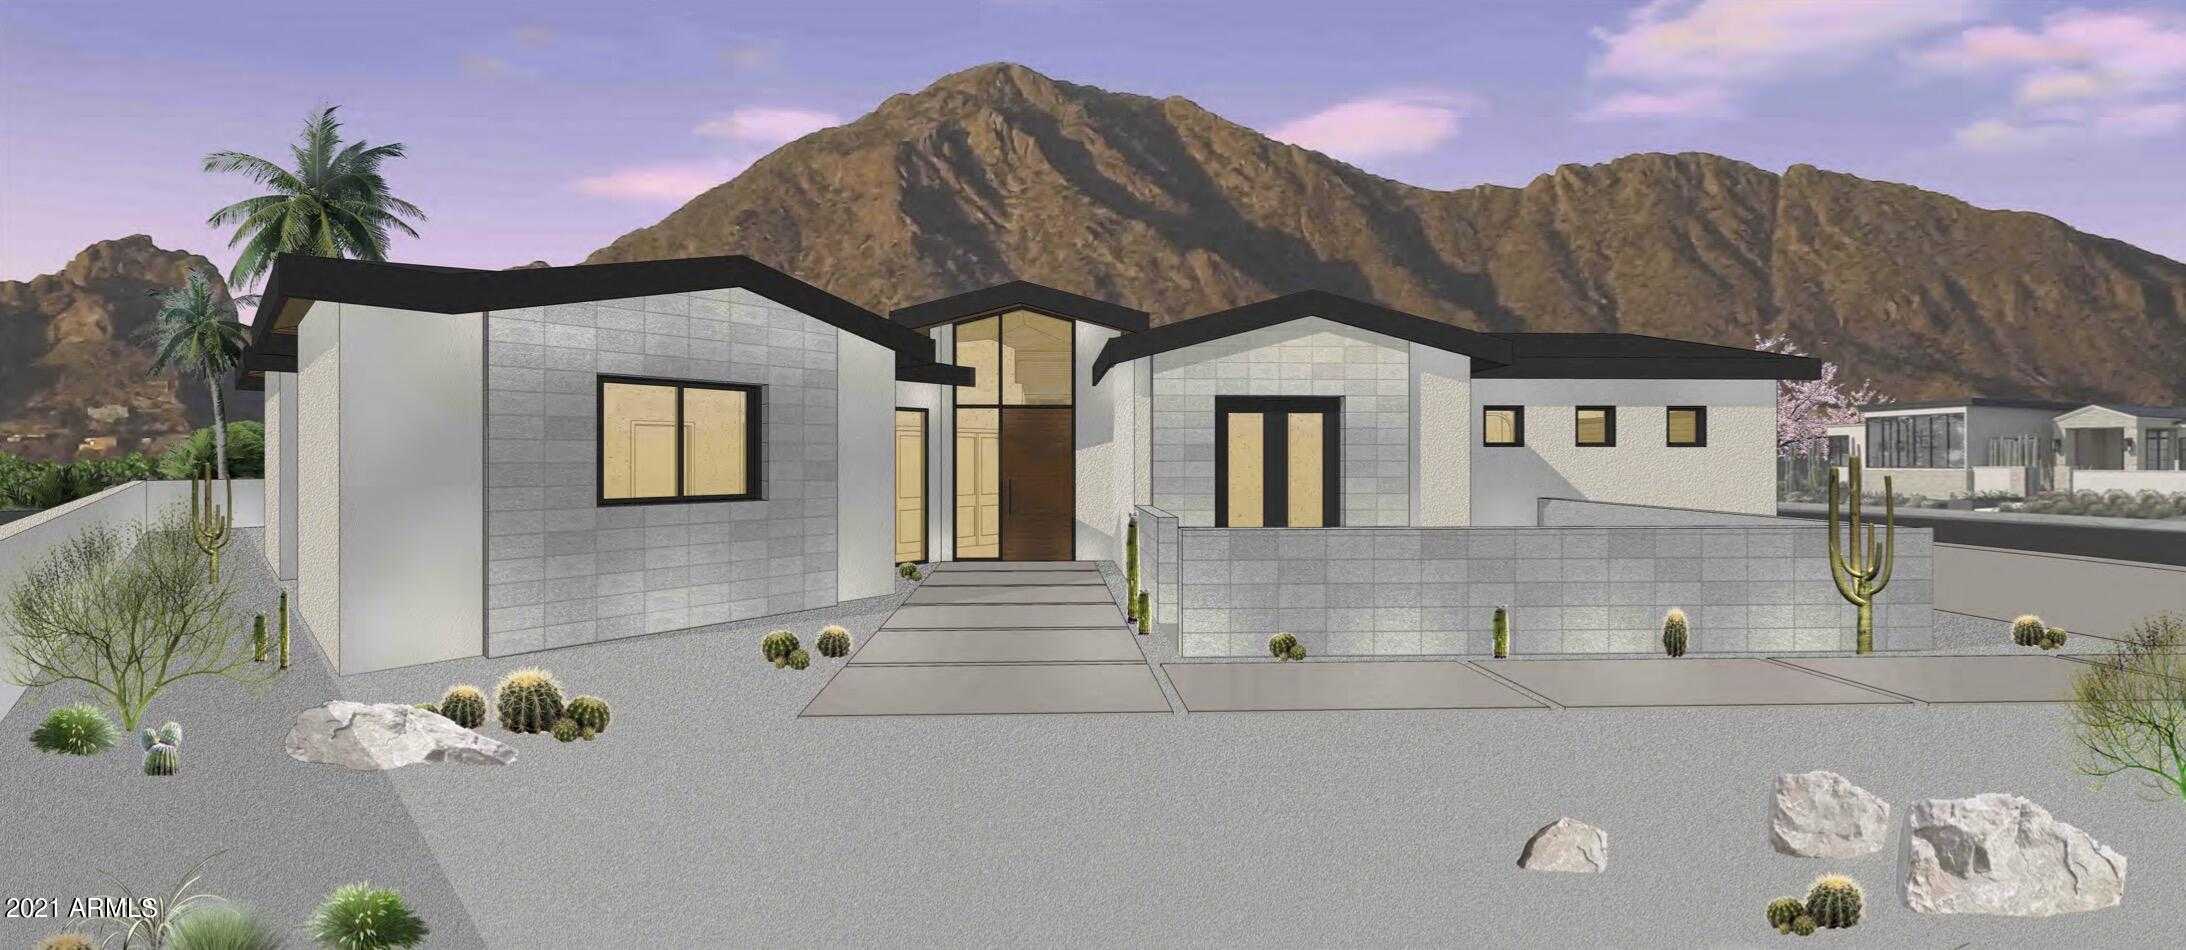 $1,735,000 - 4Br/4Ba - Home for Sale in Mountain Shadow Resort Amd, Paradise Valley